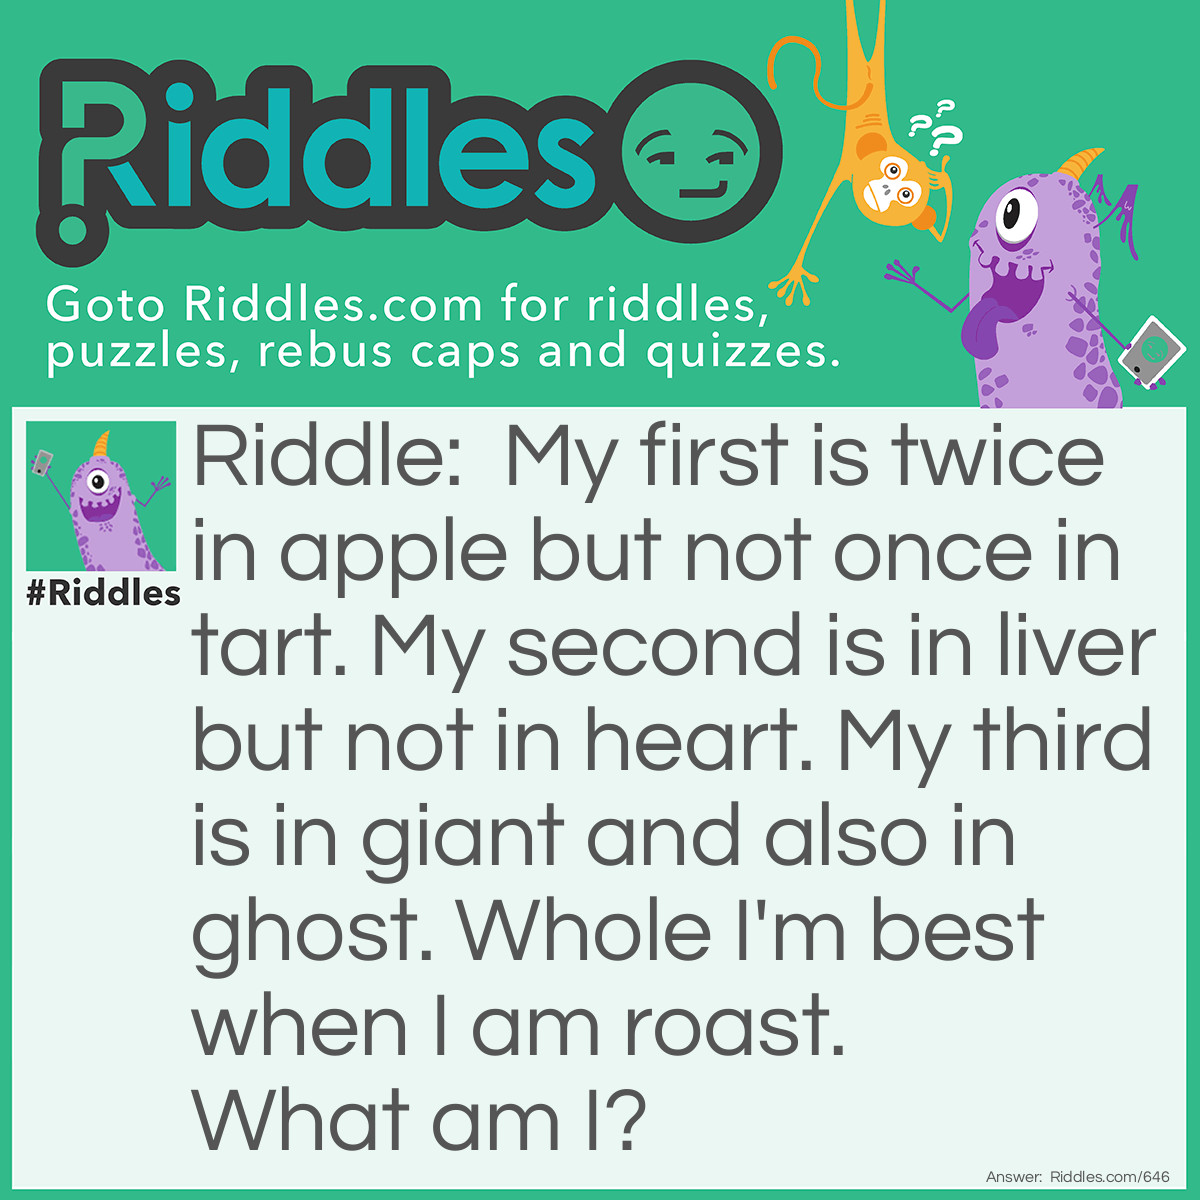 Riddle: My first is twice in apple but not once in tart. My second is in liver but not in heart. My third is in giant and also in ghost. Whole I'm best when I am roast.  What am I? Answer: The word Pig.